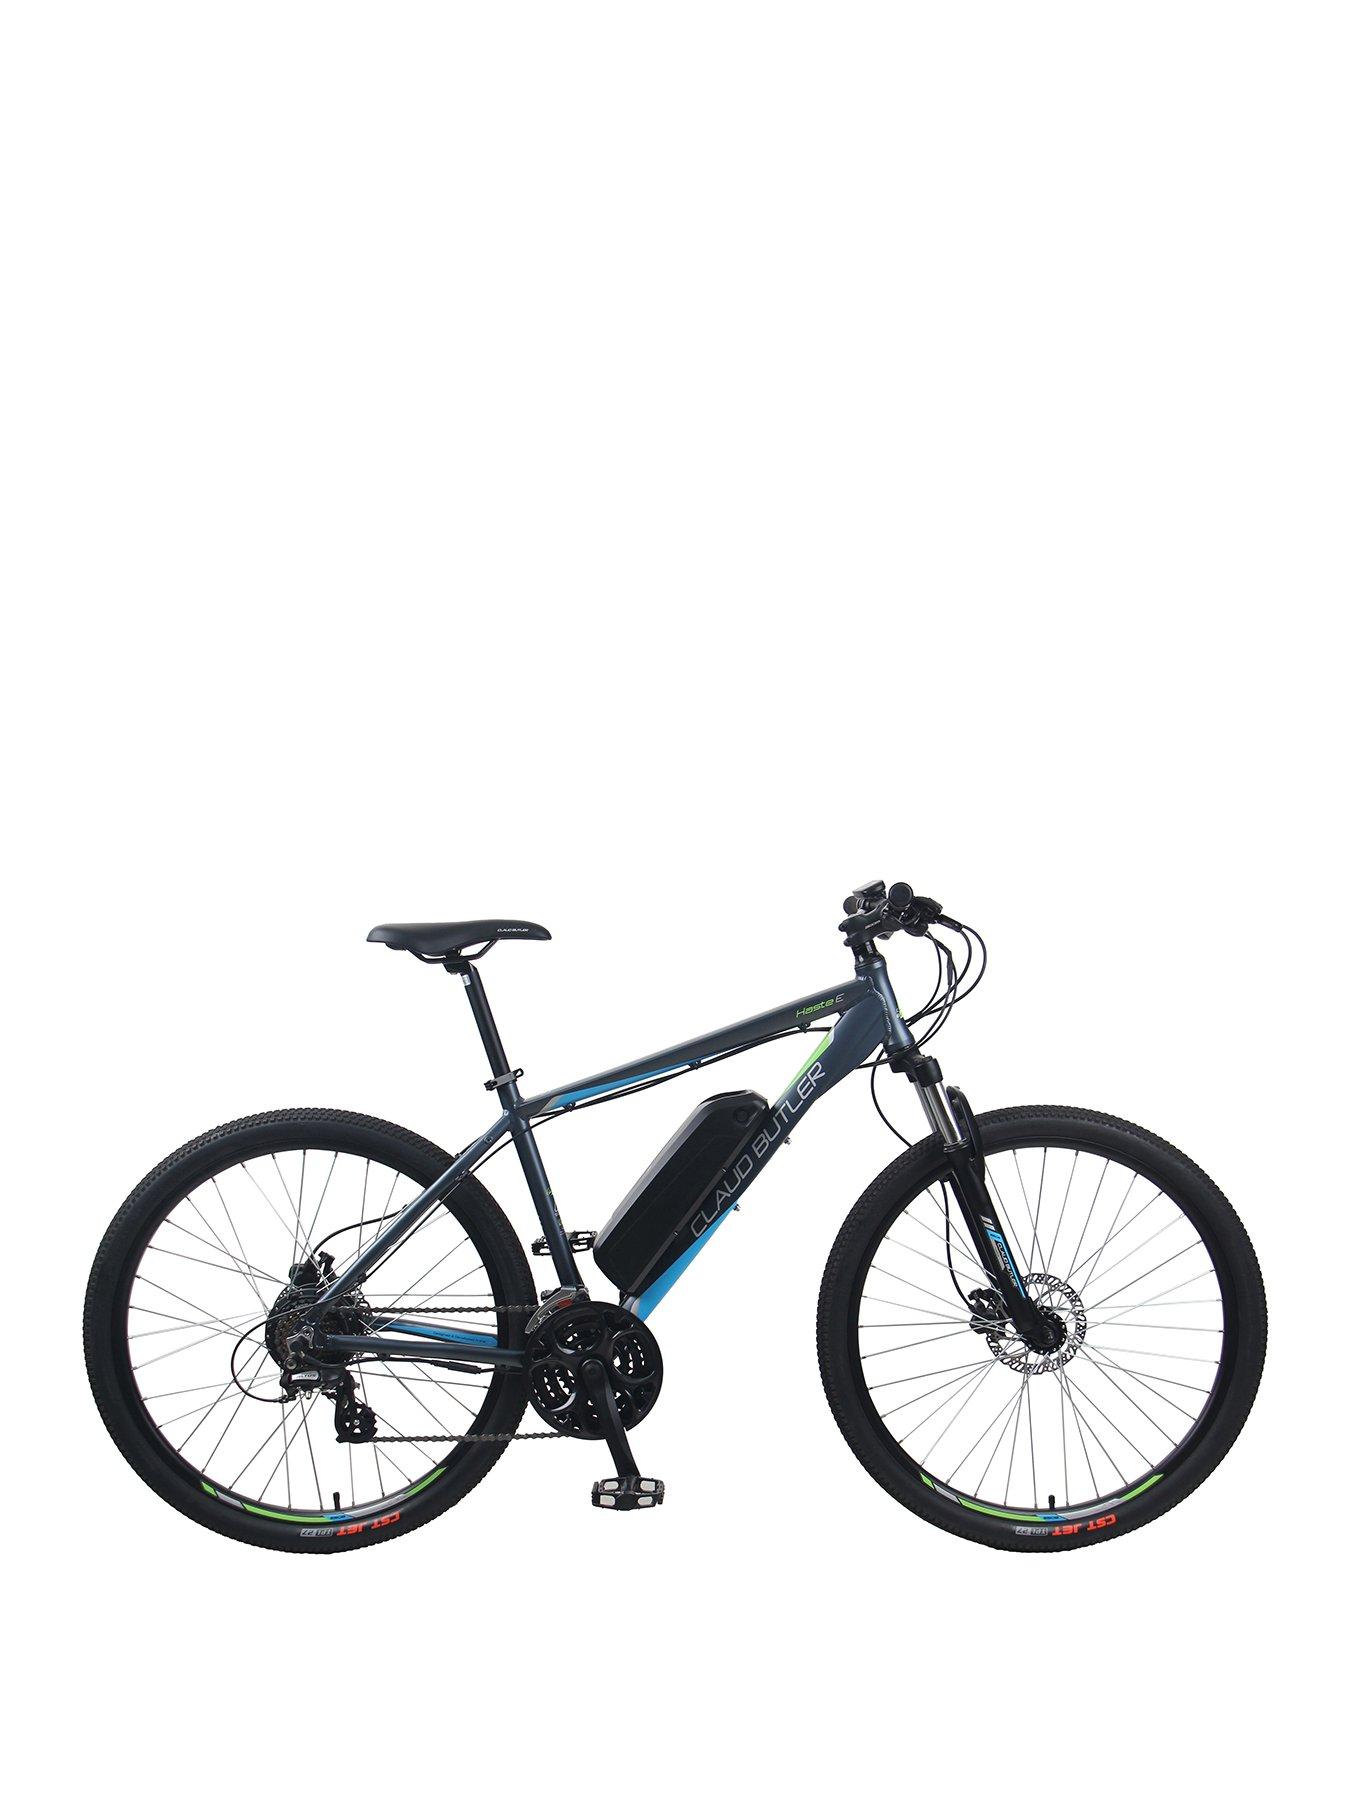 Vitesse Advance Lightweight Electric Bike For Adults, 60 Miles Range, 7  Speed Shimano Gears With 250w Rear Motor For A Smooth Comfortable Ride, 18”